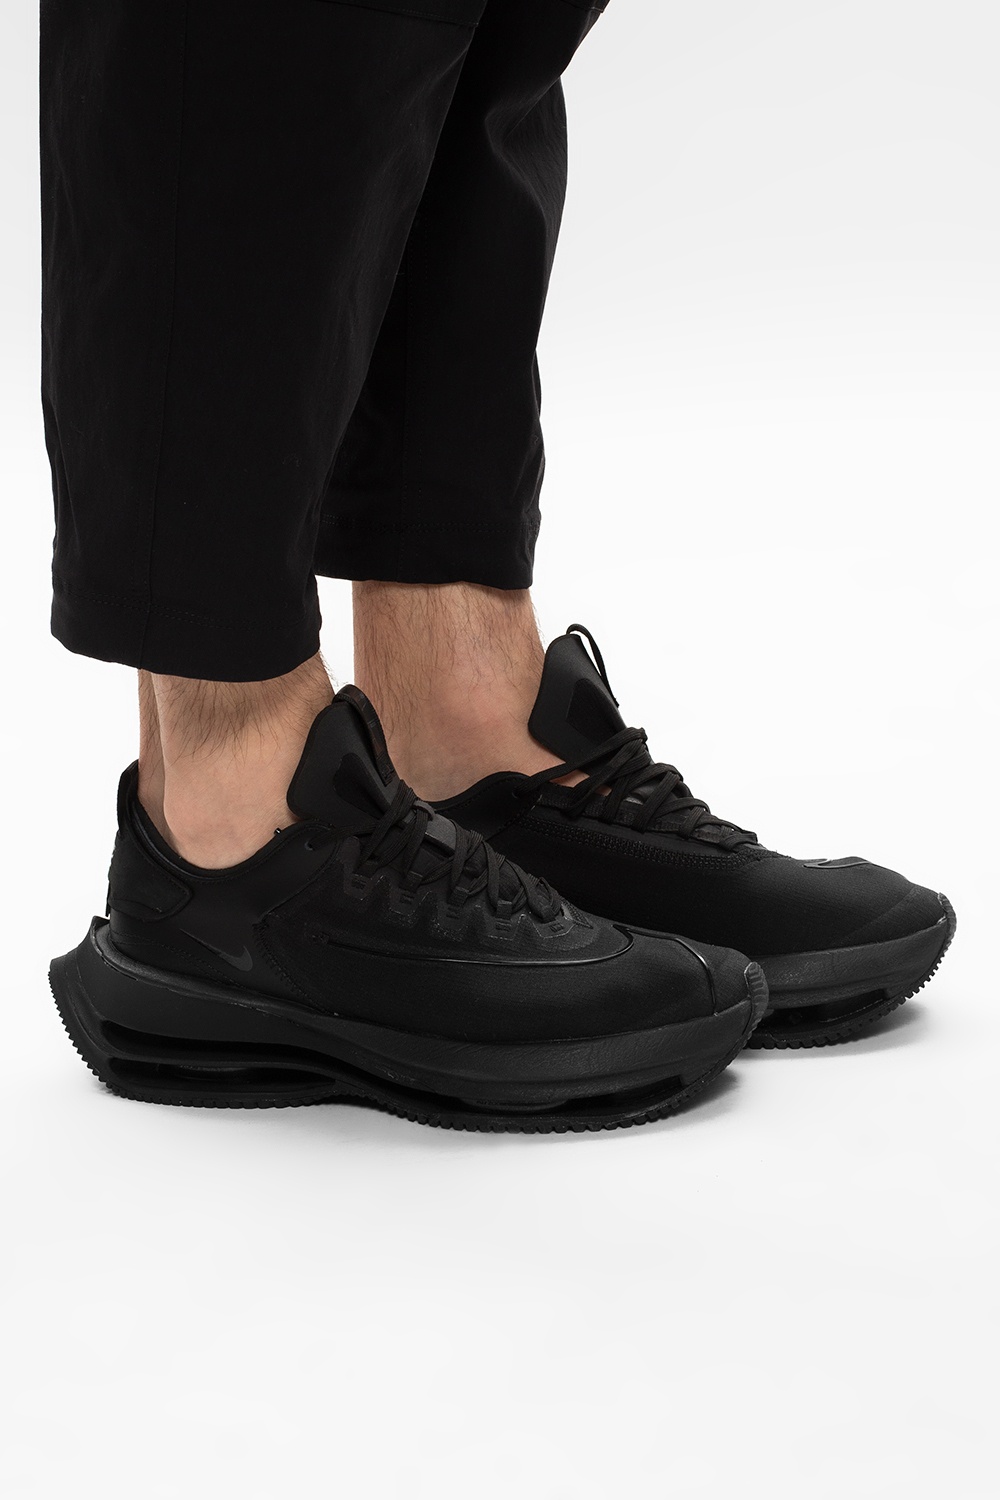 Nike 'Zoom Double Stacked' sneakers | Men's Shoes